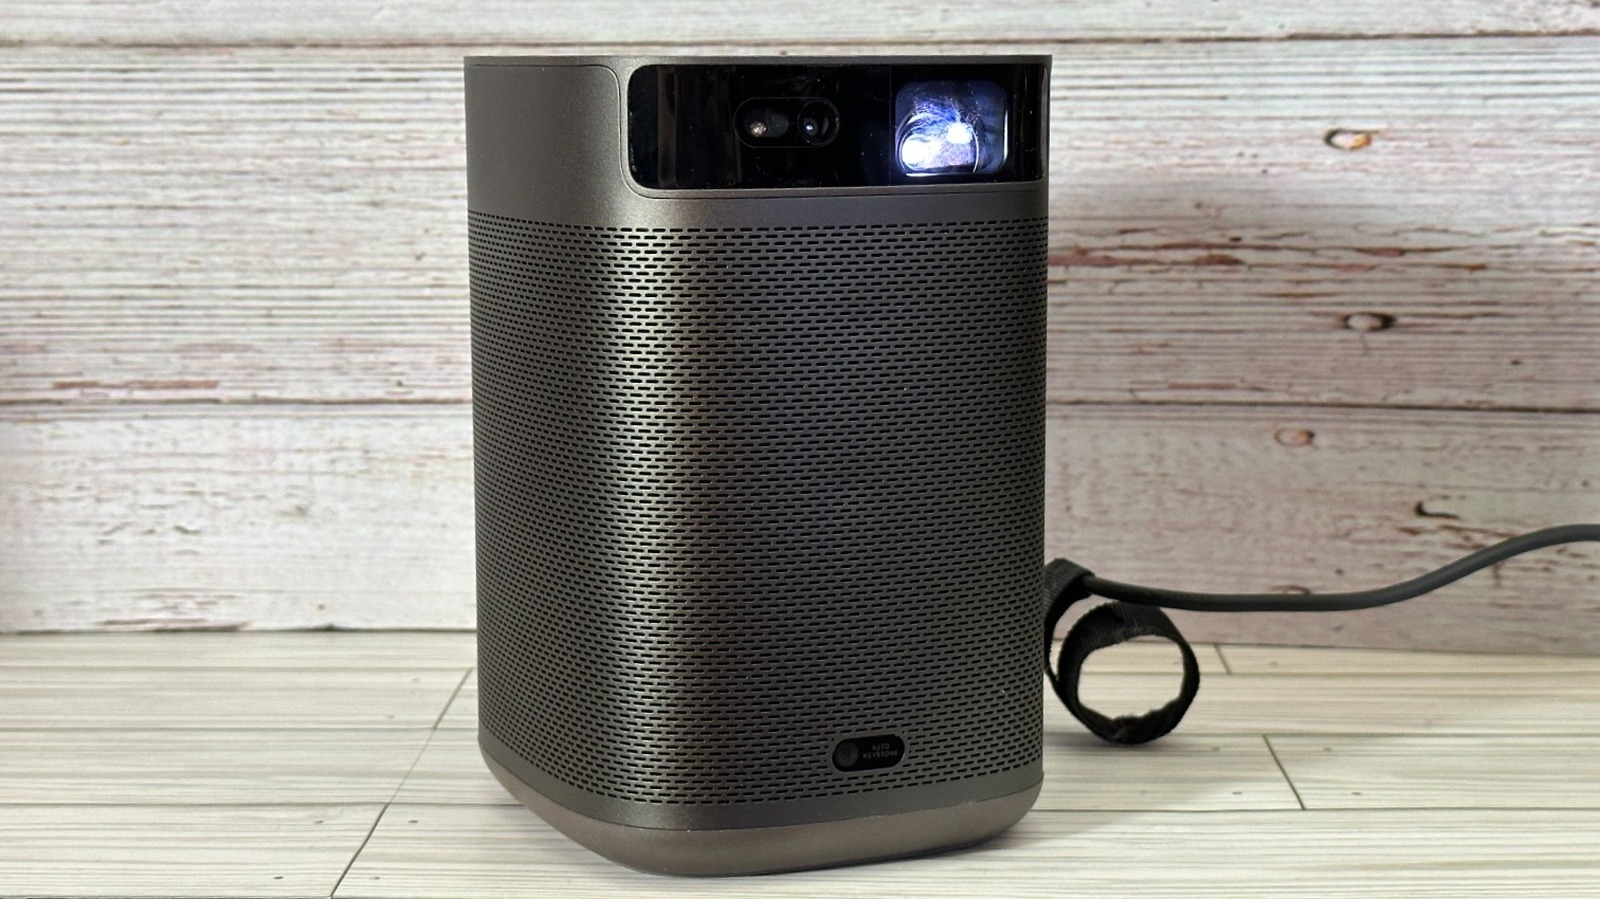 XGIMI MoGo 2 Pro Projector Review